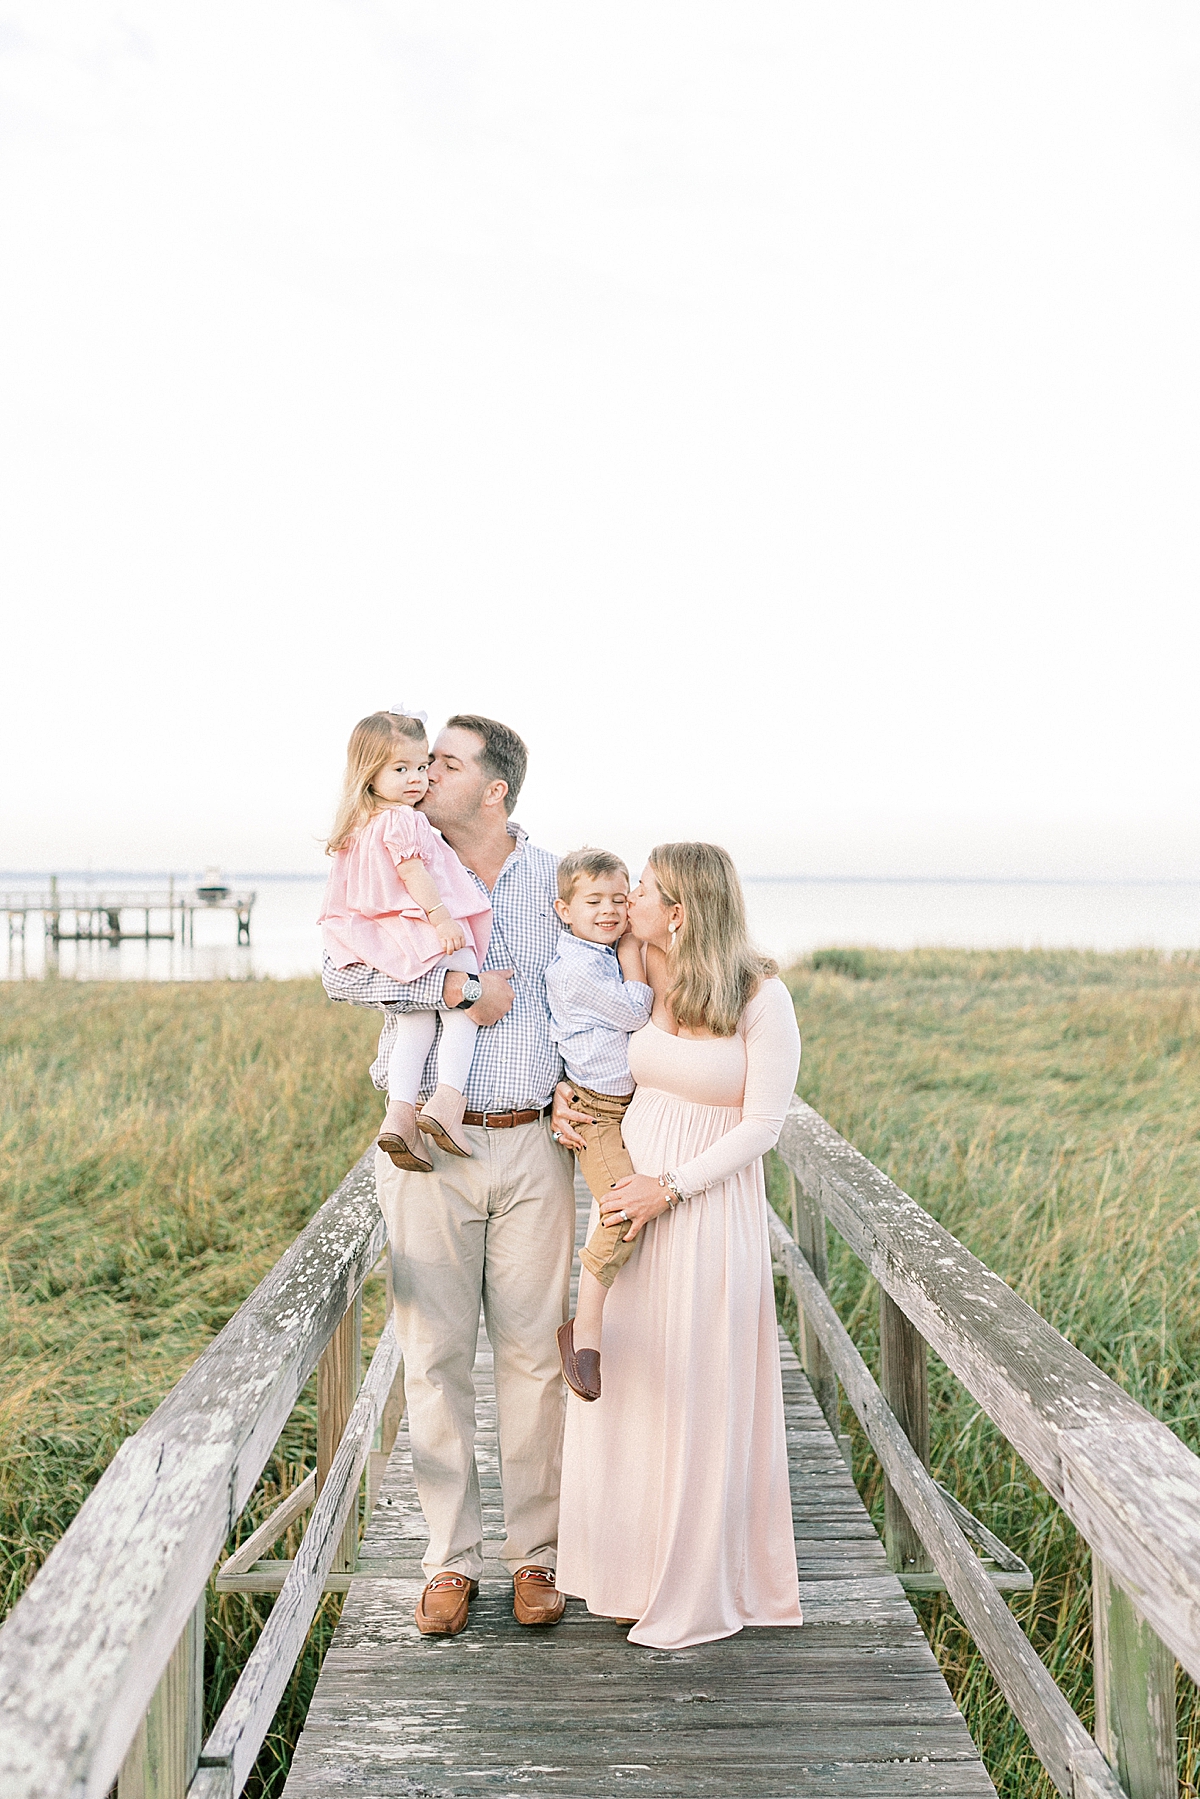 Family cuddling on dock in Old Village of Mount Pleasant, SC during family photoshoot with Caitlyn Motycka Photography.